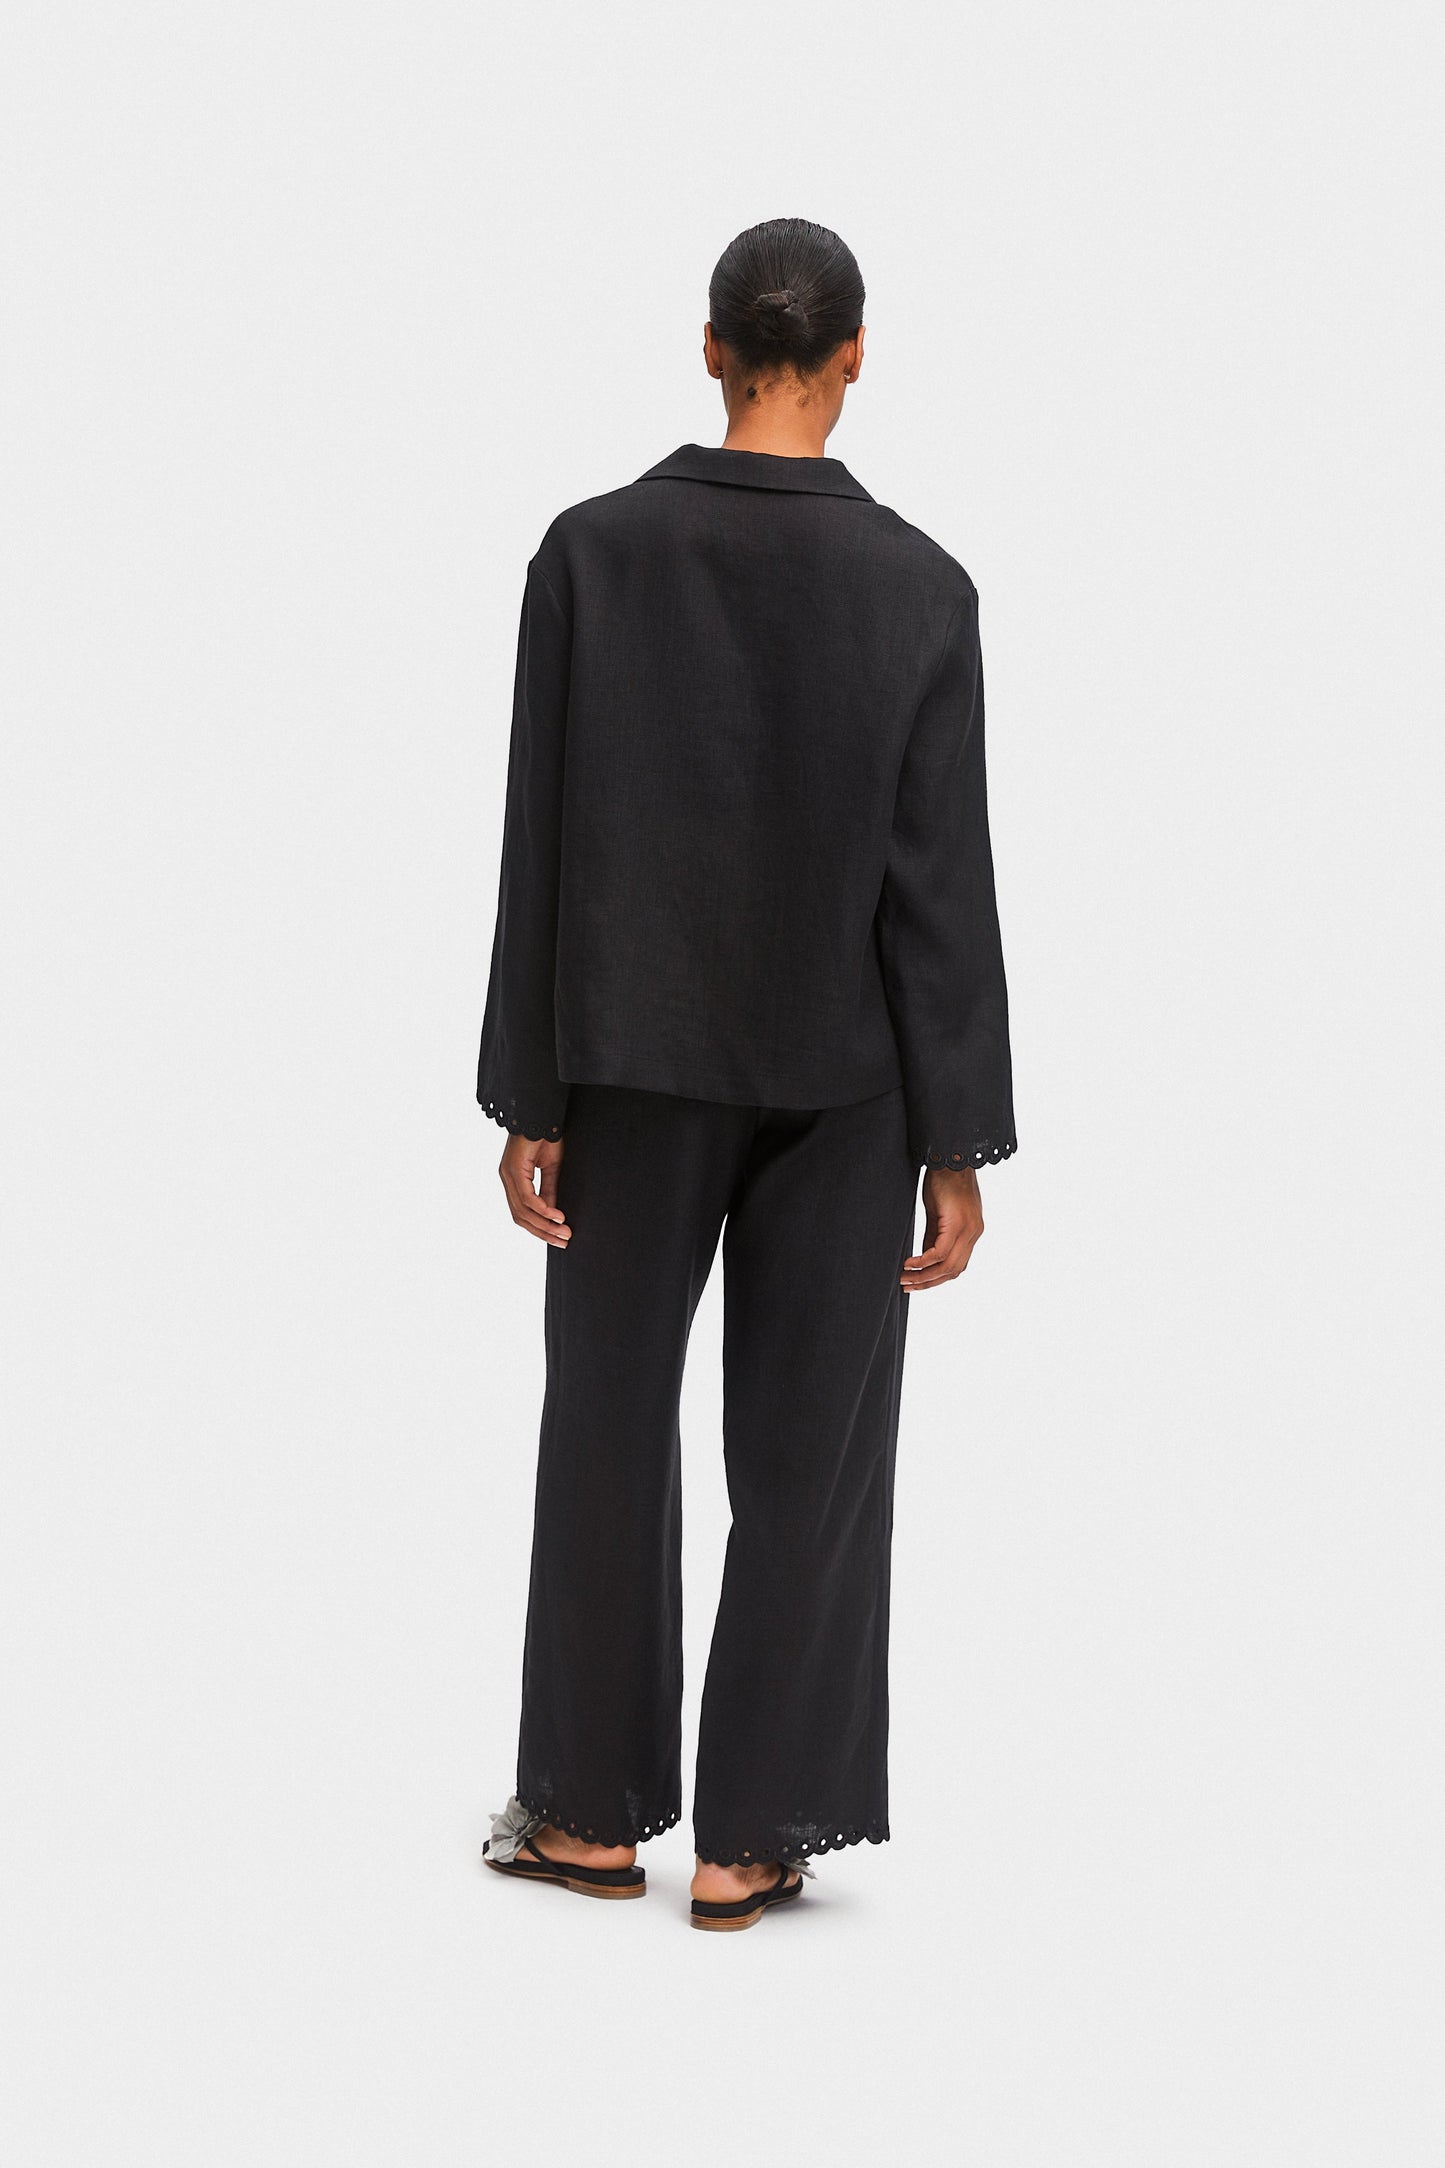 Sofia Linen Embroidered Pants in Black